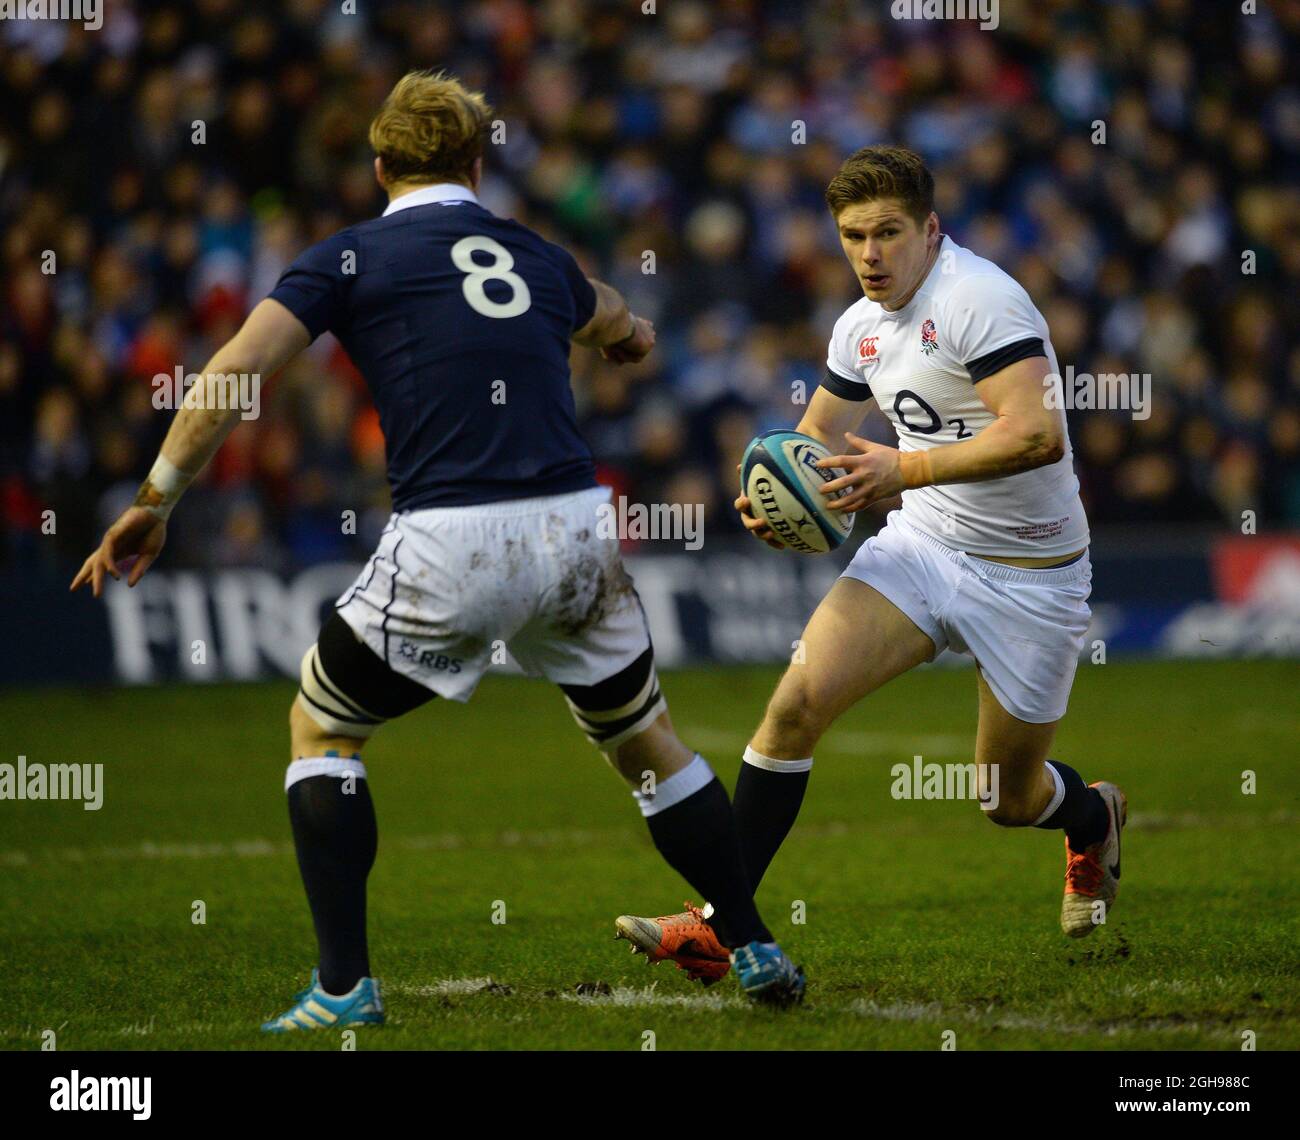 Owen Farrell of England in action during the RBS 6Nations match between Scotland and England at Murrayfield Stadium, Edinburgh on February 8, 2014. Stock Photo